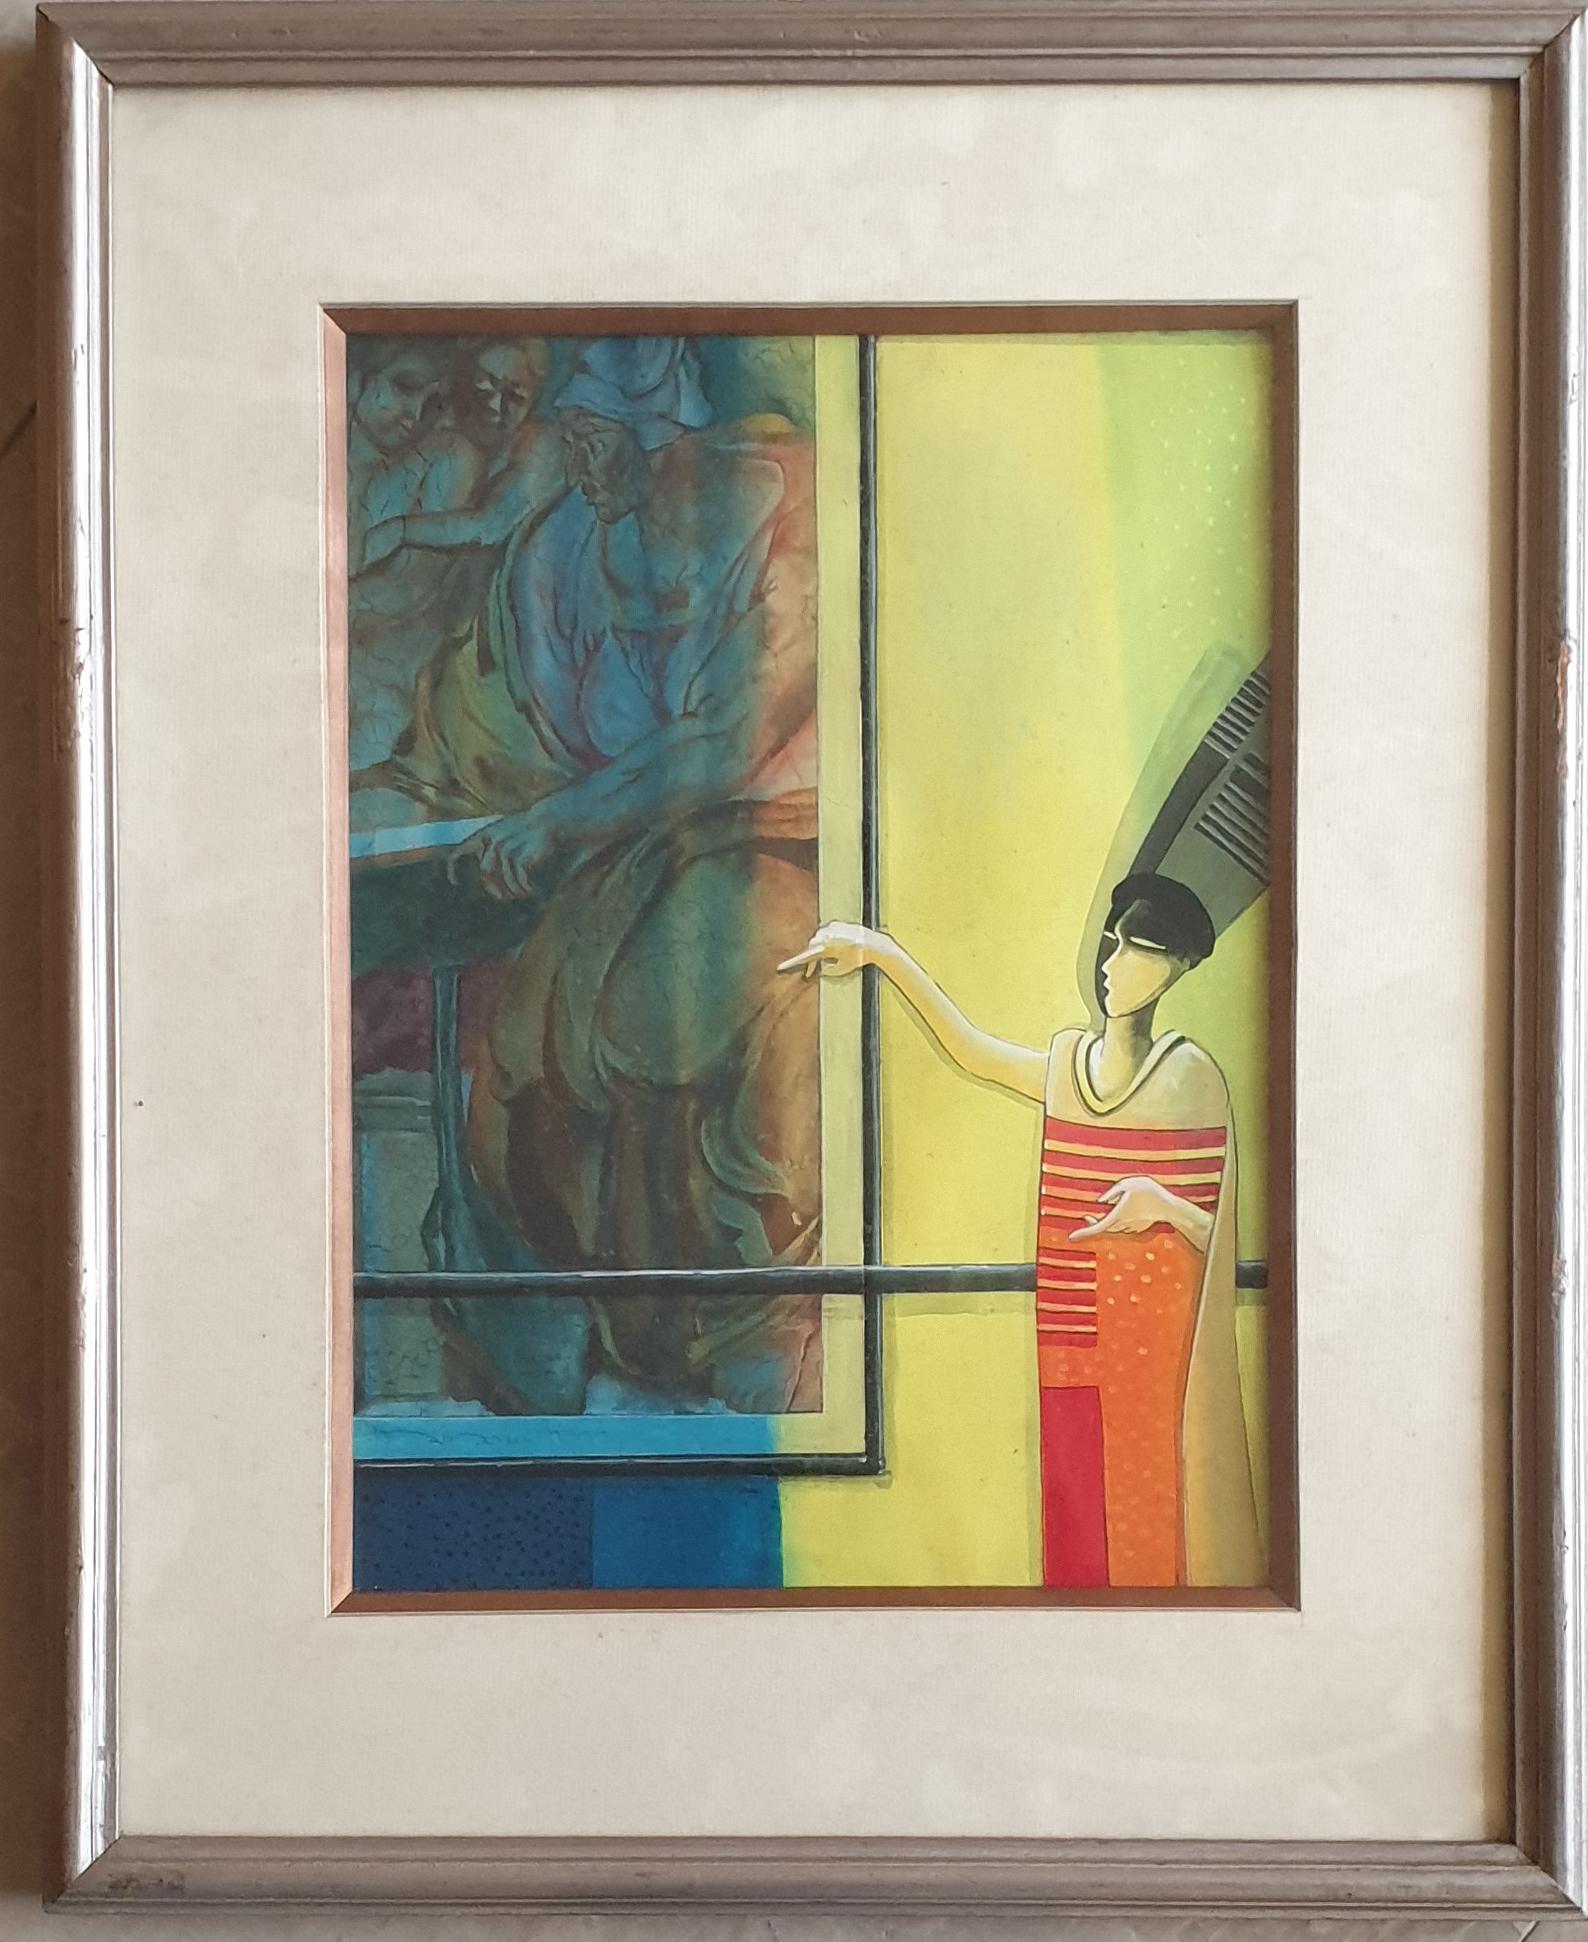 Samir Sarkar Figurative Painting - Framed Photograph, Acrylic on Paper, Red, Blue, Yellow, Indian Artist "In Stock"